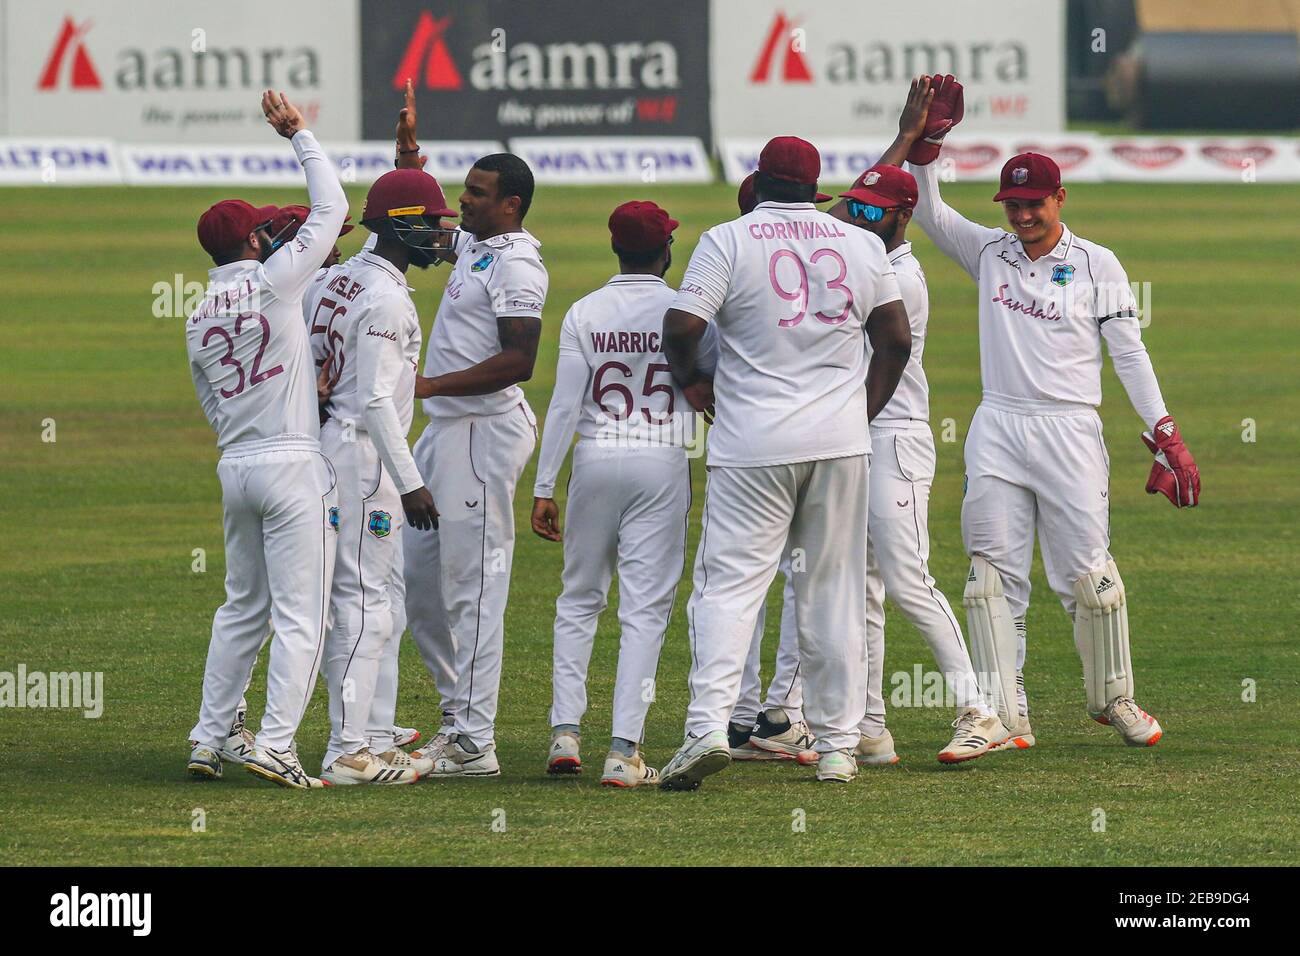 West Indies cricketers celebrate after the dismissal of Bangladeshs player during the second day of the second Test cricket match between West Indies and Bangladesh at the Sher-e-Bangla National Cricket Stadium